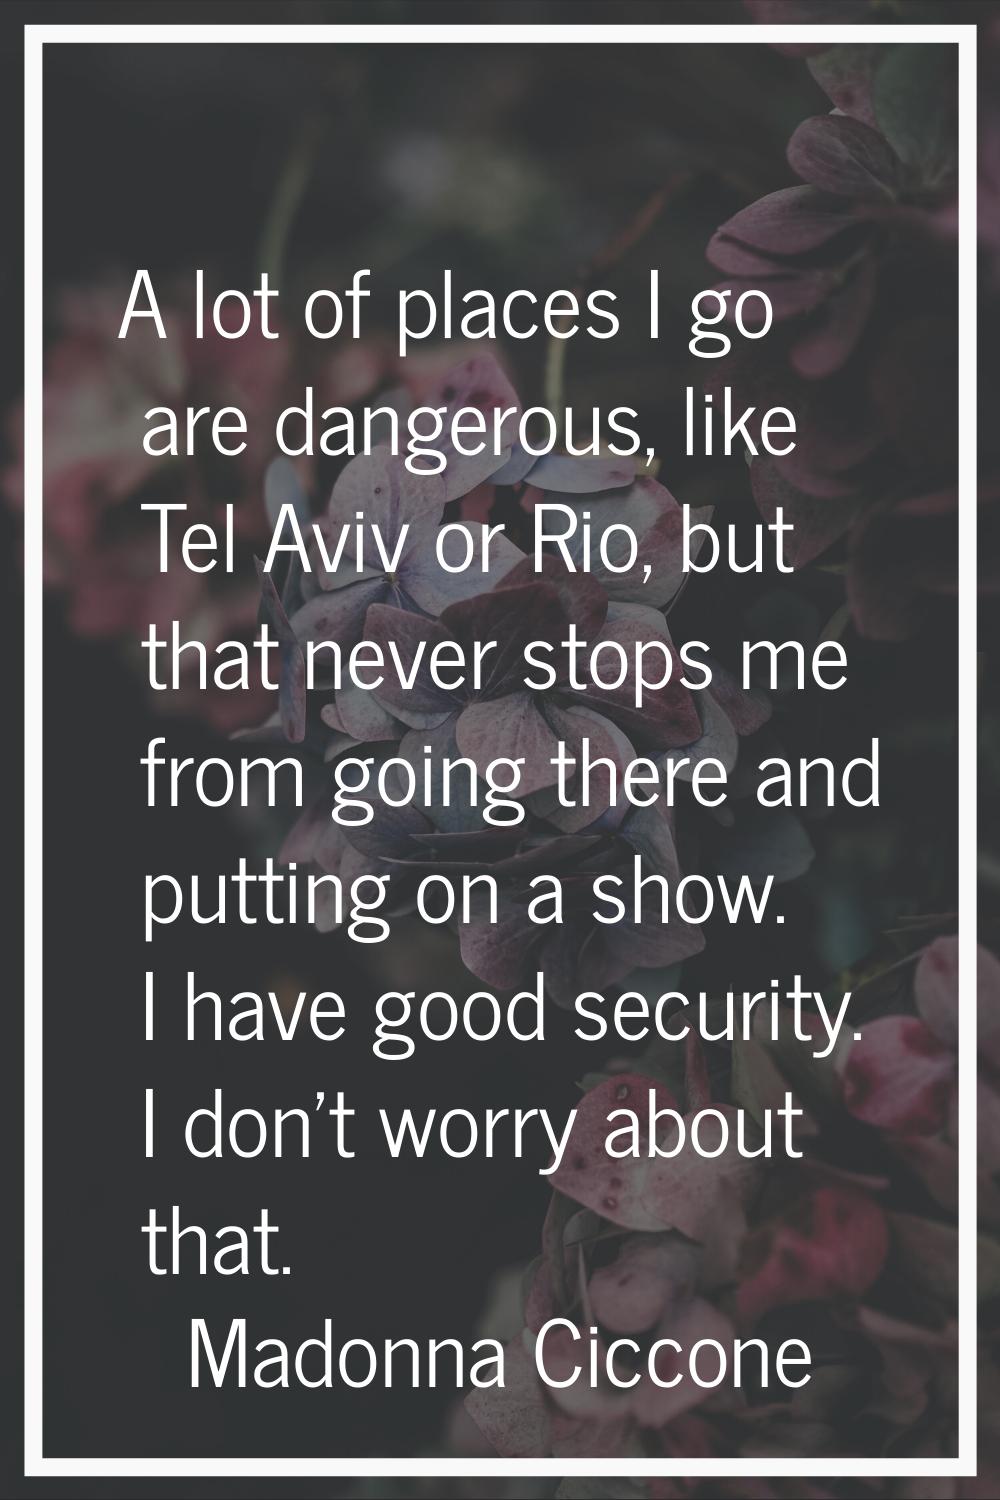 A lot of places I go are dangerous, like Tel Aviv or Rio, but that never stops me from going there 